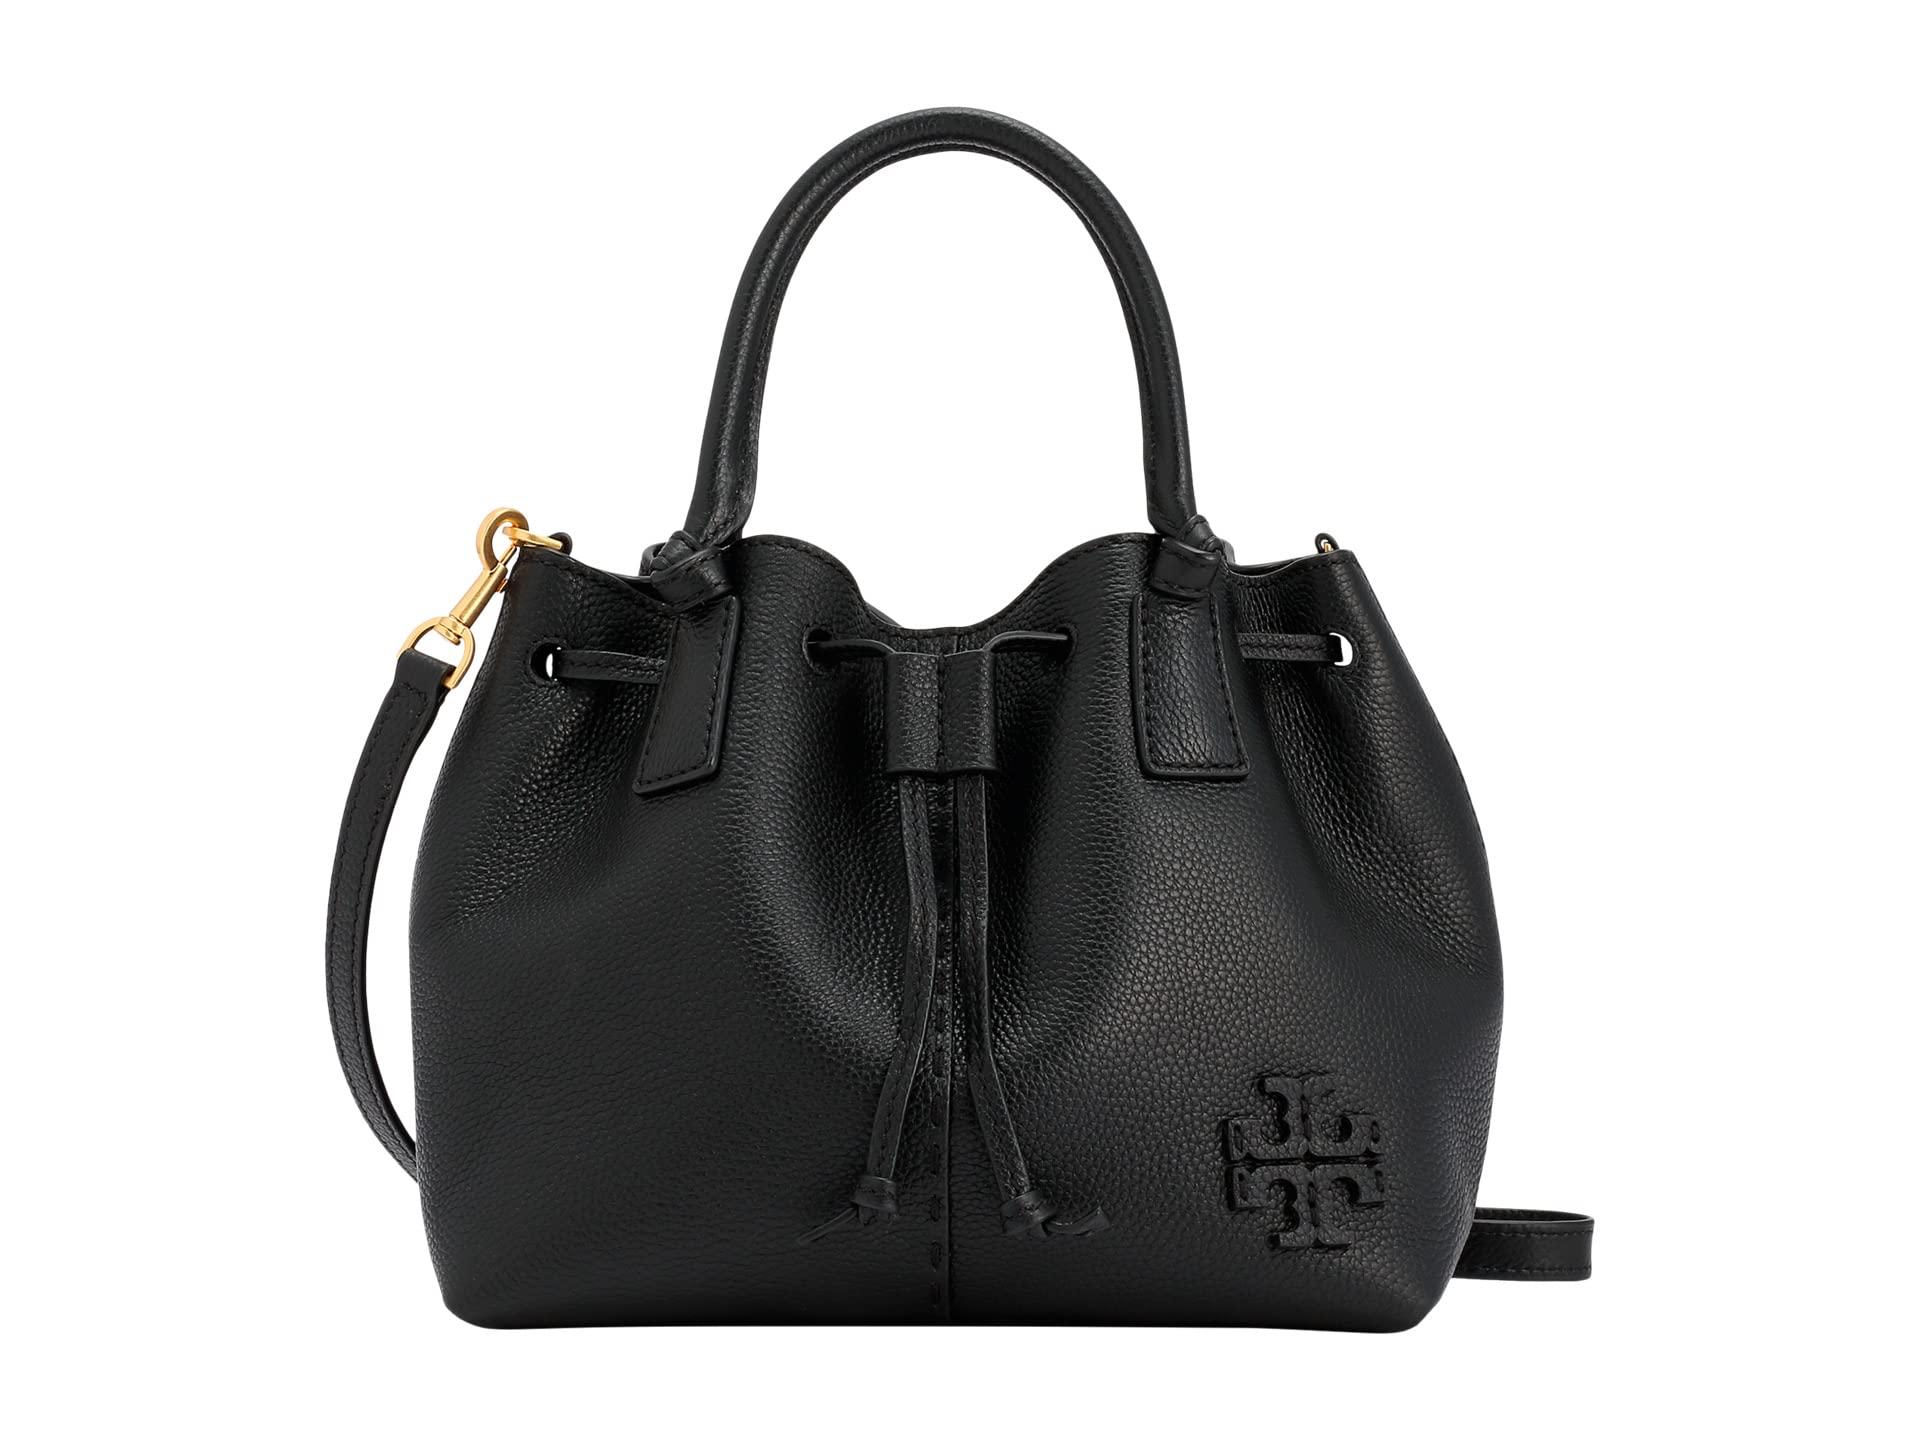 Tory Burch Leather Mcgraw Small Drawstring Satchel in Black | Lyst